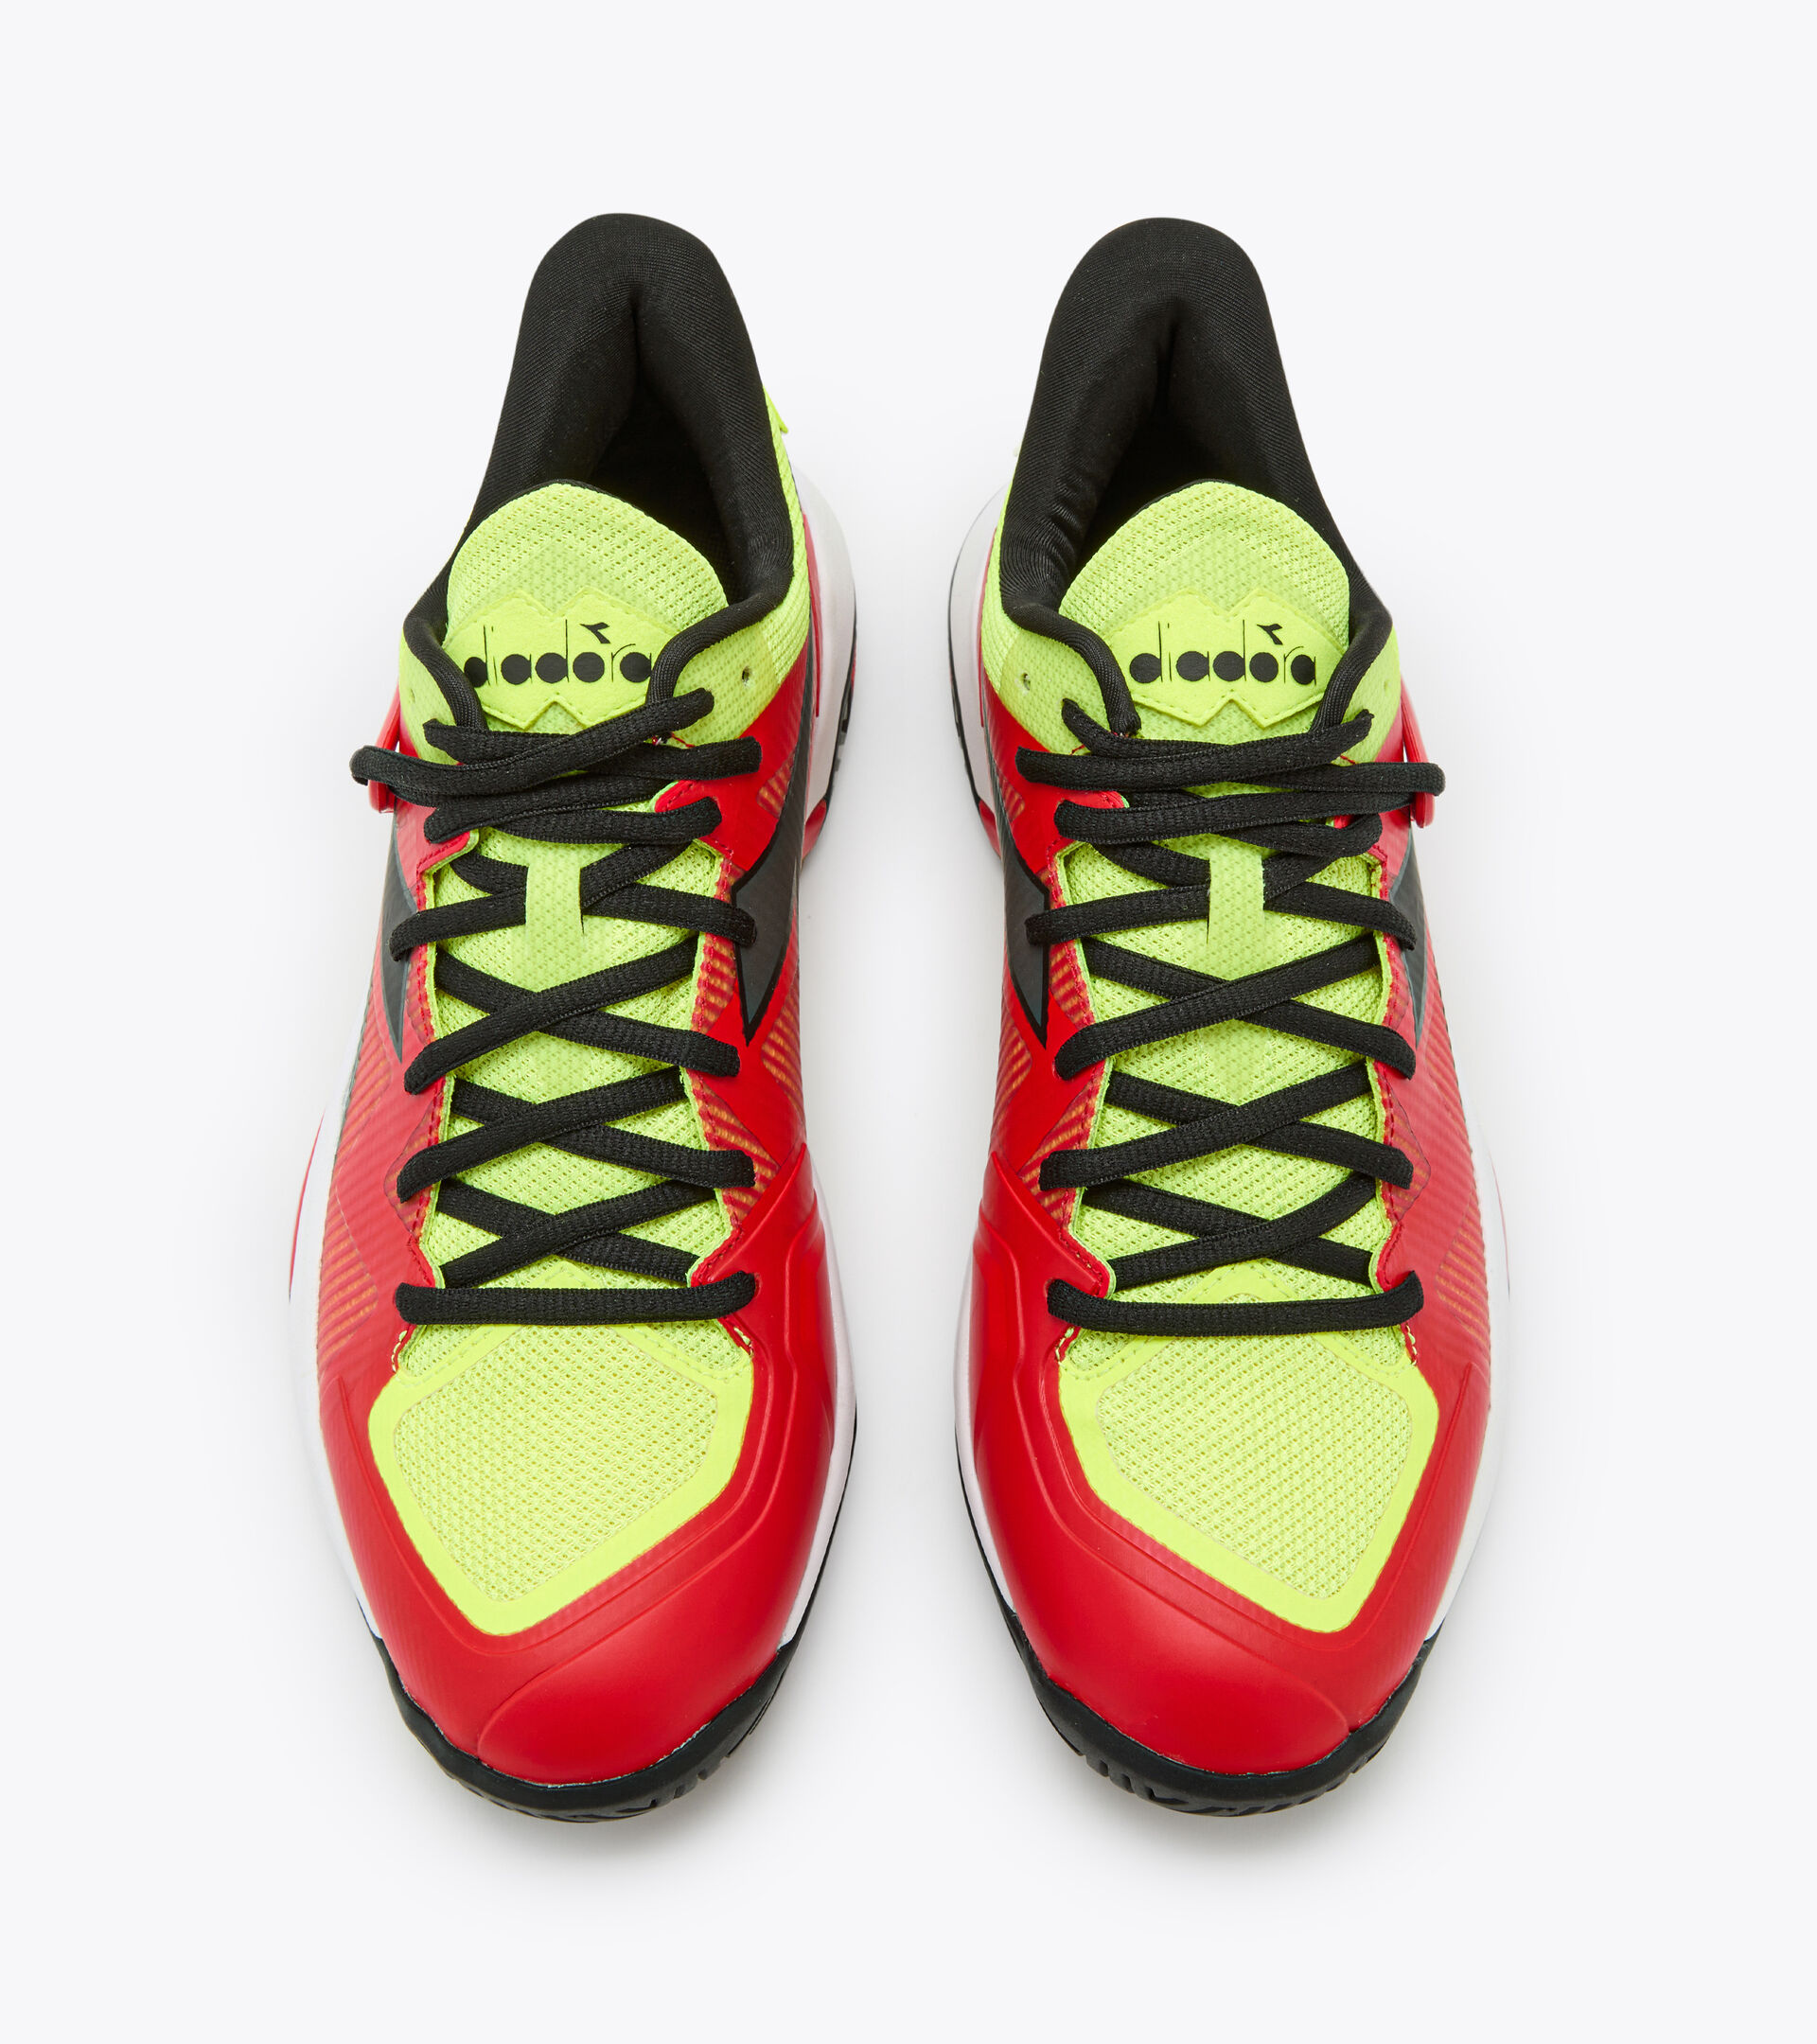 Tennis shoes for hard surfaces or clay - Men B.ICON 2 AG YELLOW FLUO DD/BLK/FIERY RED - Diadora